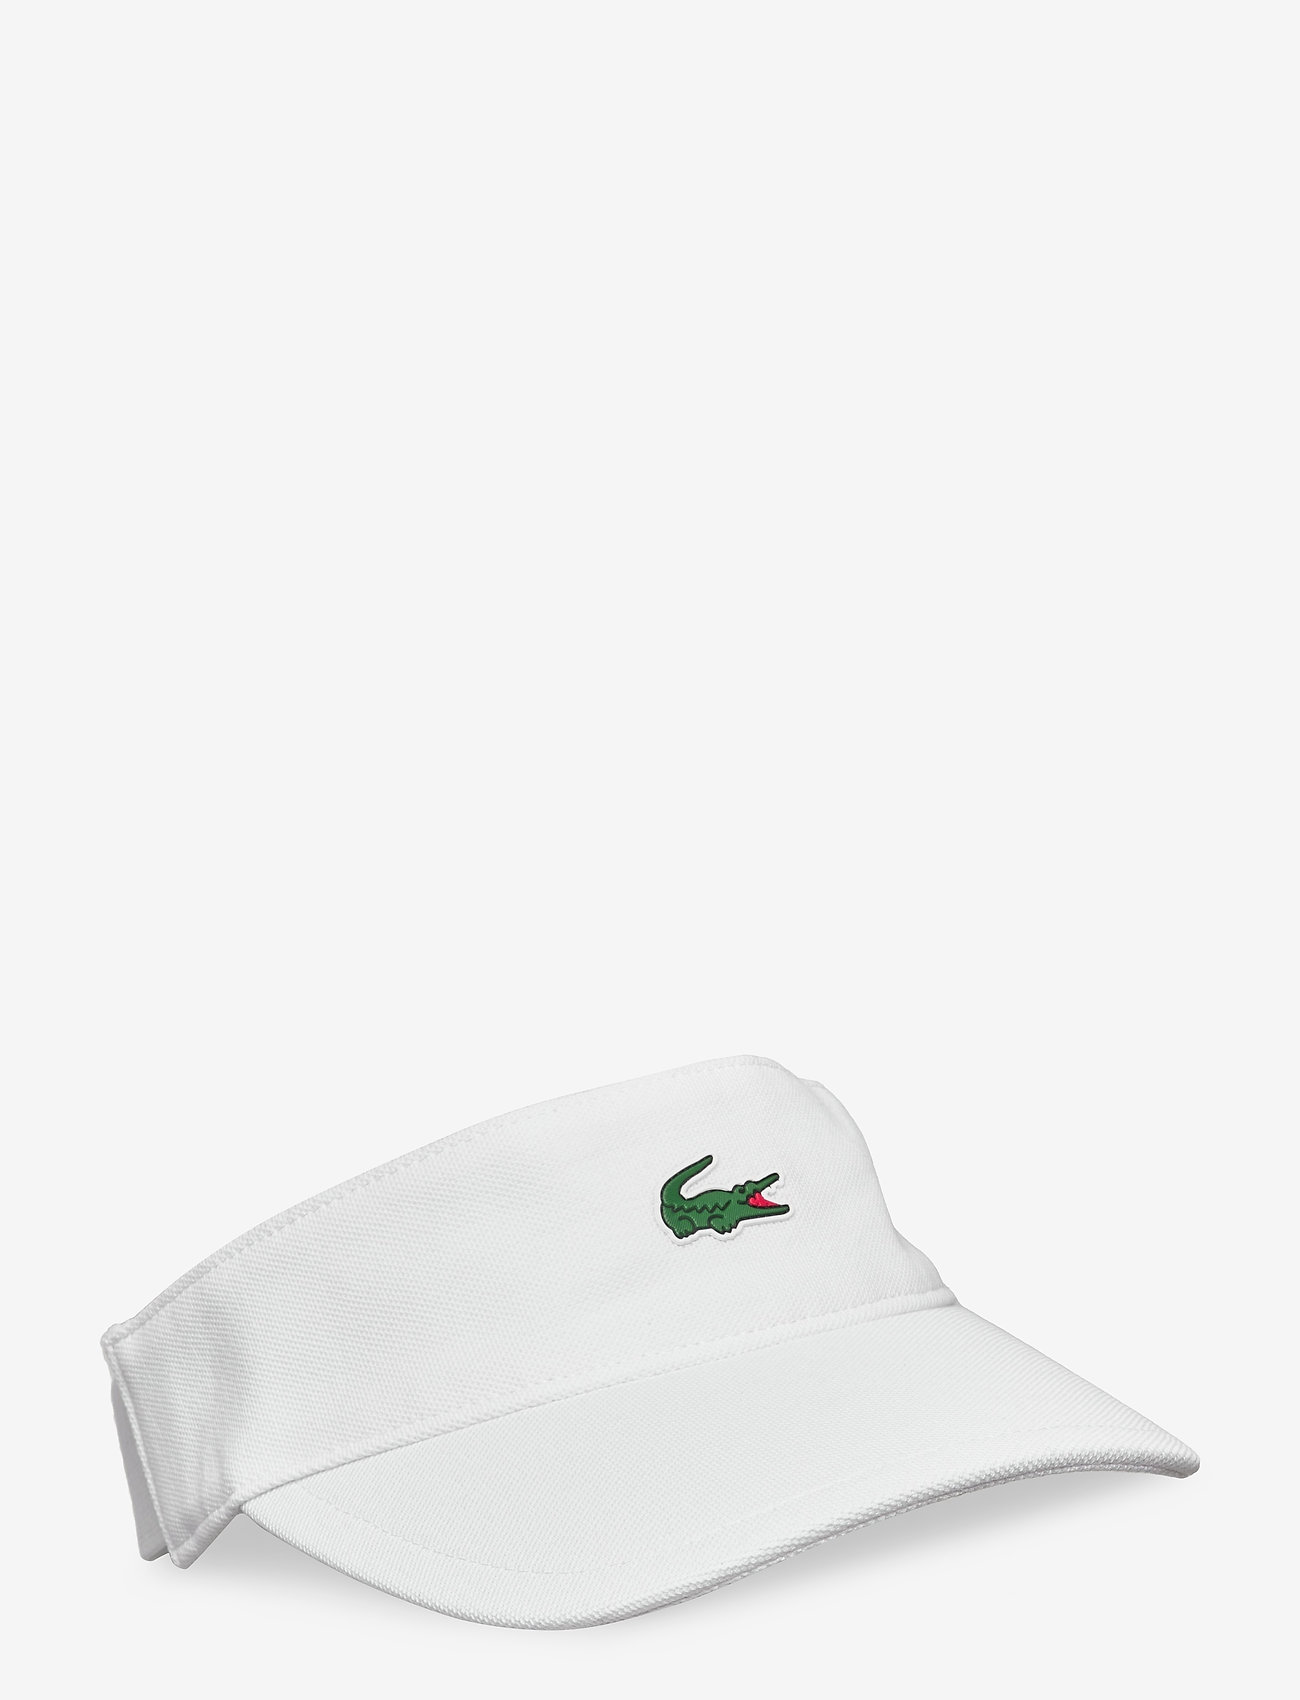 Lacoste - CAPS AND HATS - kappen - white - 0